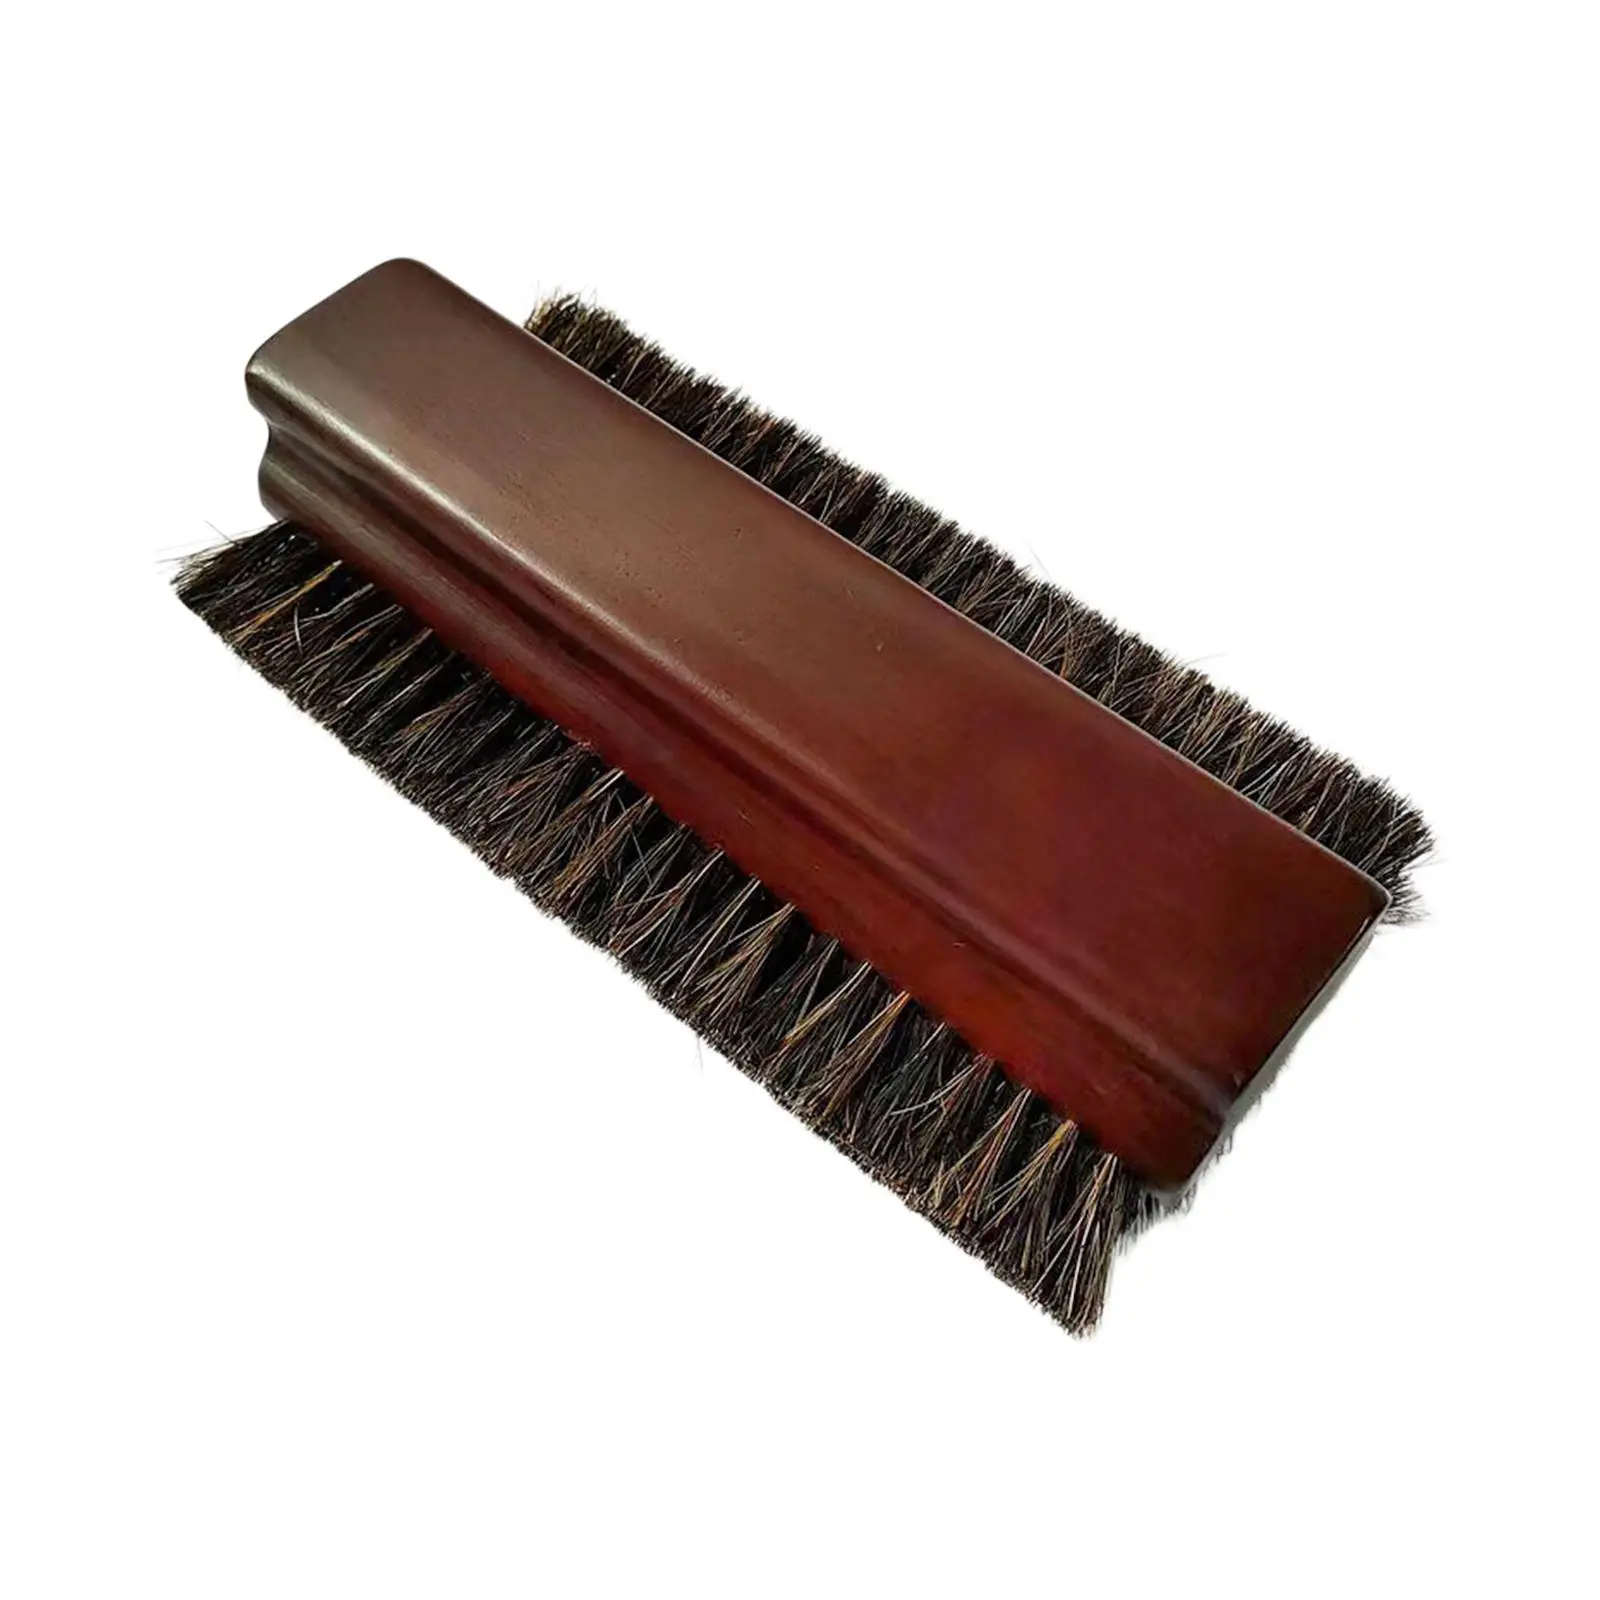 Billiard Table Brush Wooden Handle Durable Comfortable Gripping Lightweight Practical Convenient Three Sided Horse Hair Brushes